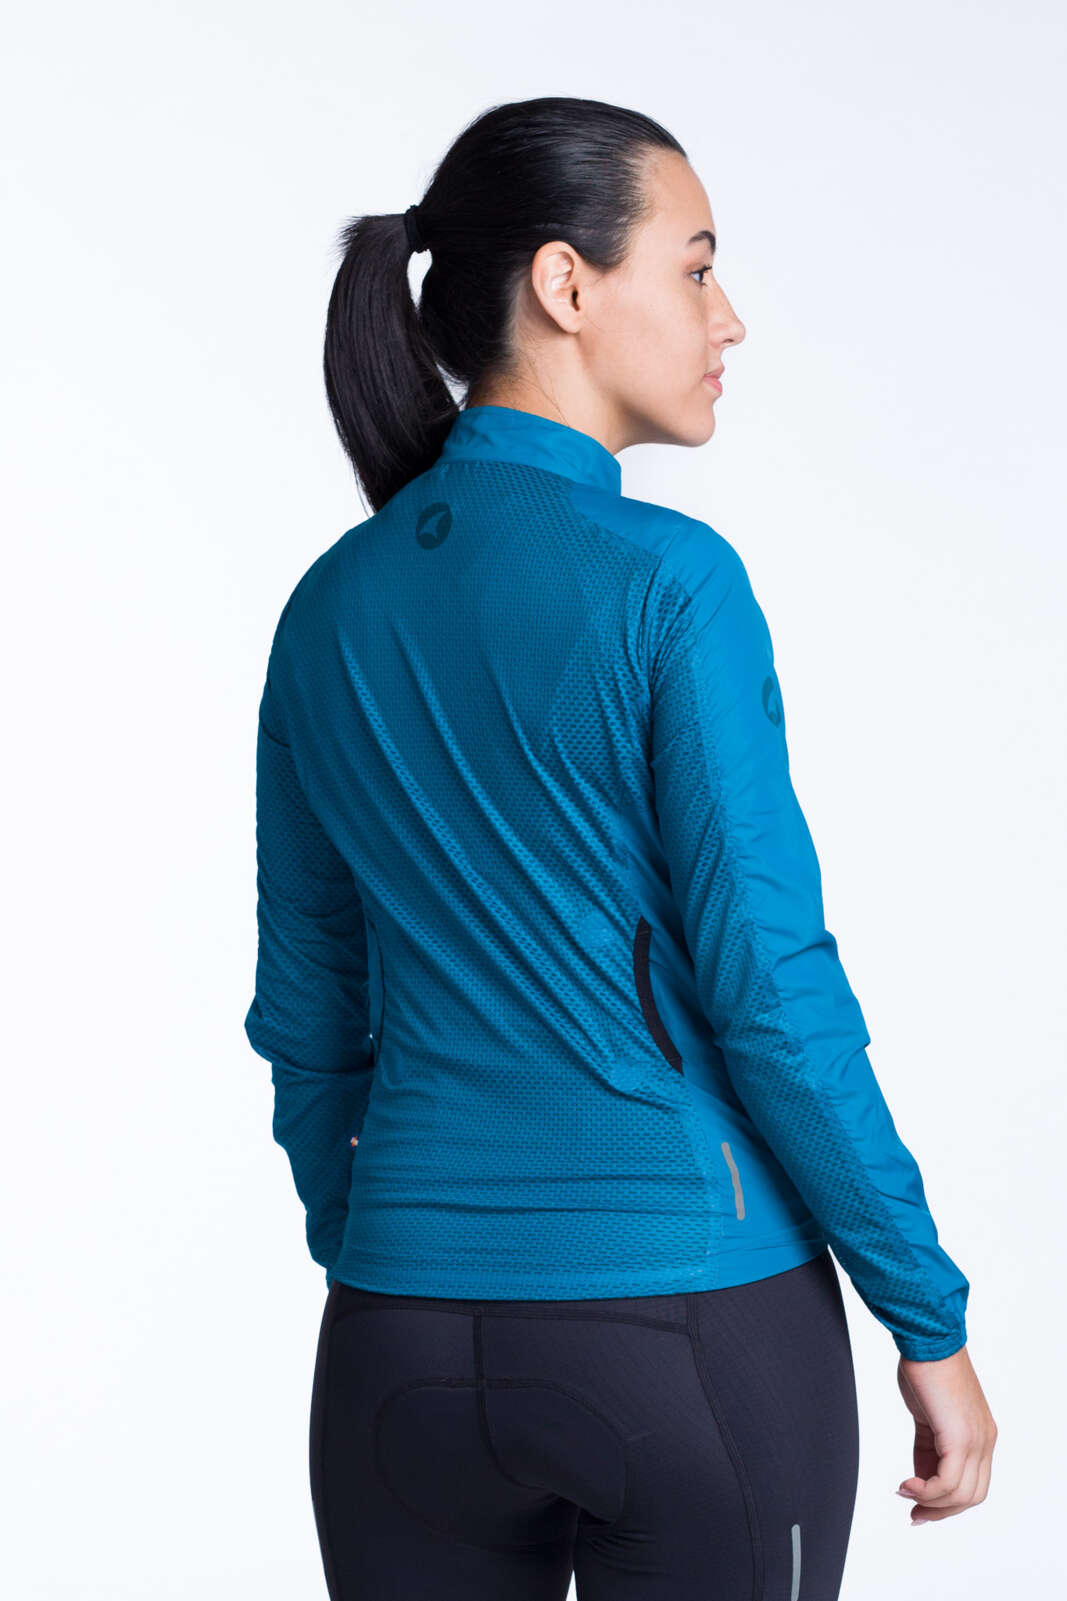 Women's Teal Packable Cycling Wind Jacket - Back View